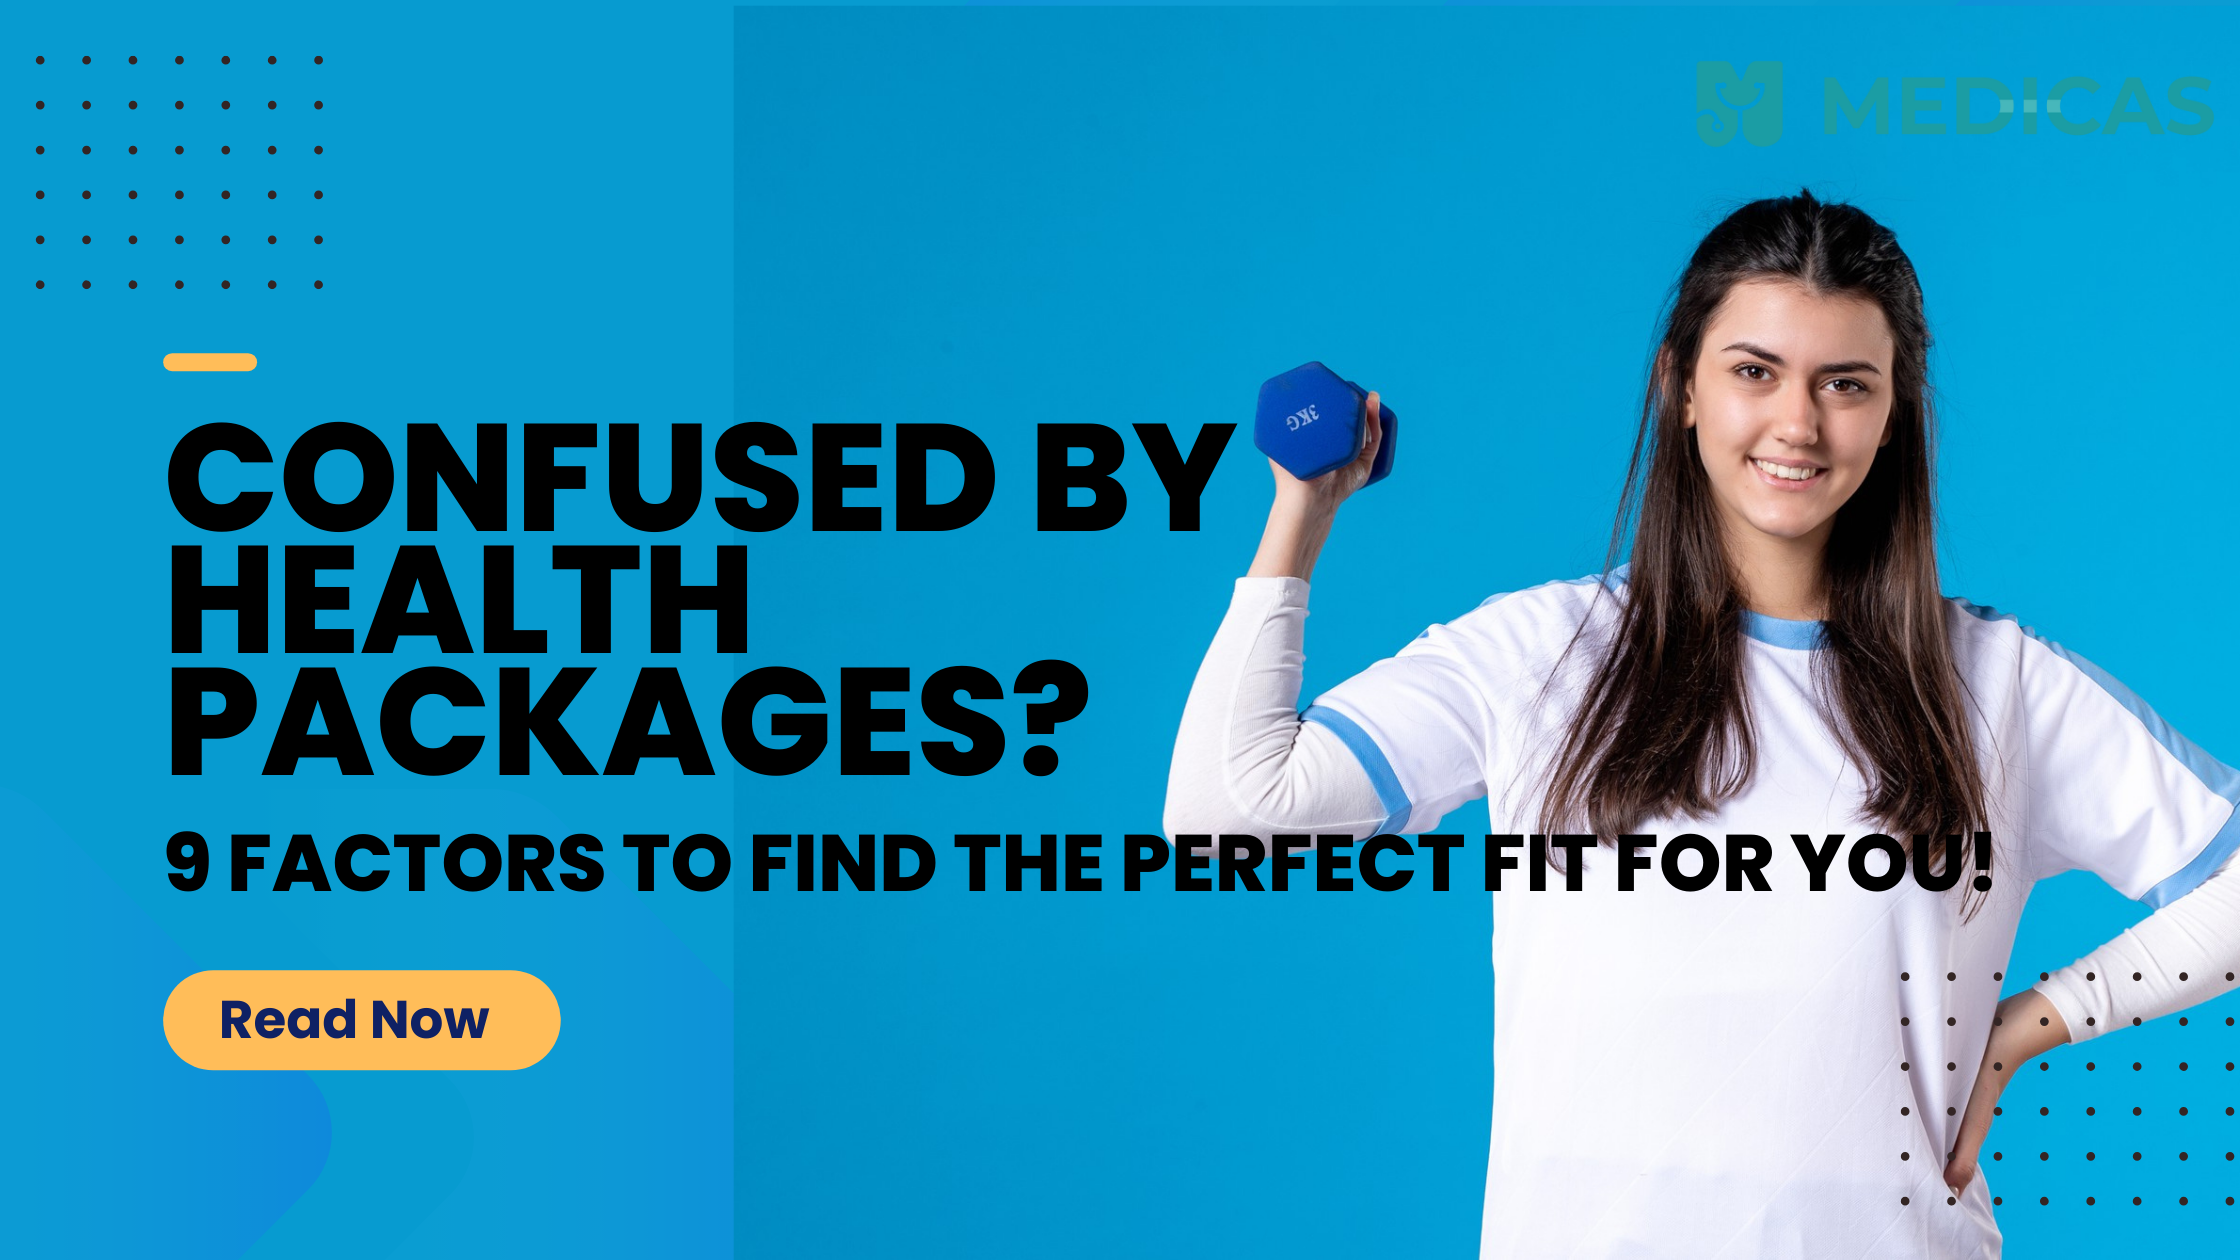 Top 9 Factors to Consider When Selecting a Health Package